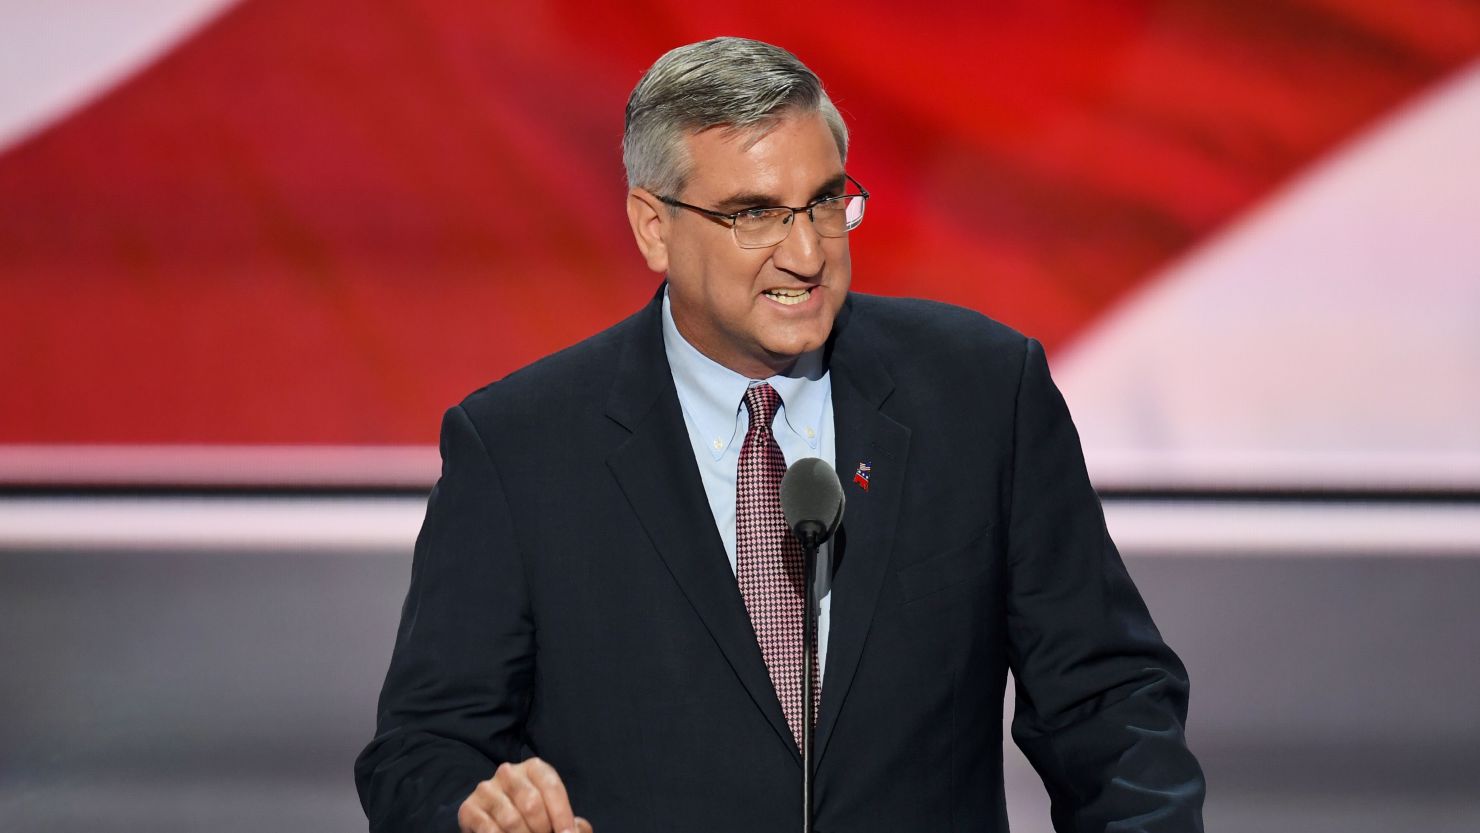 Indiana Lt. Gov. Eric Holcomb speaks on the second day of the Republican National Convention at the Quicken Loans Arena in Cleveland on July 19, 2016.